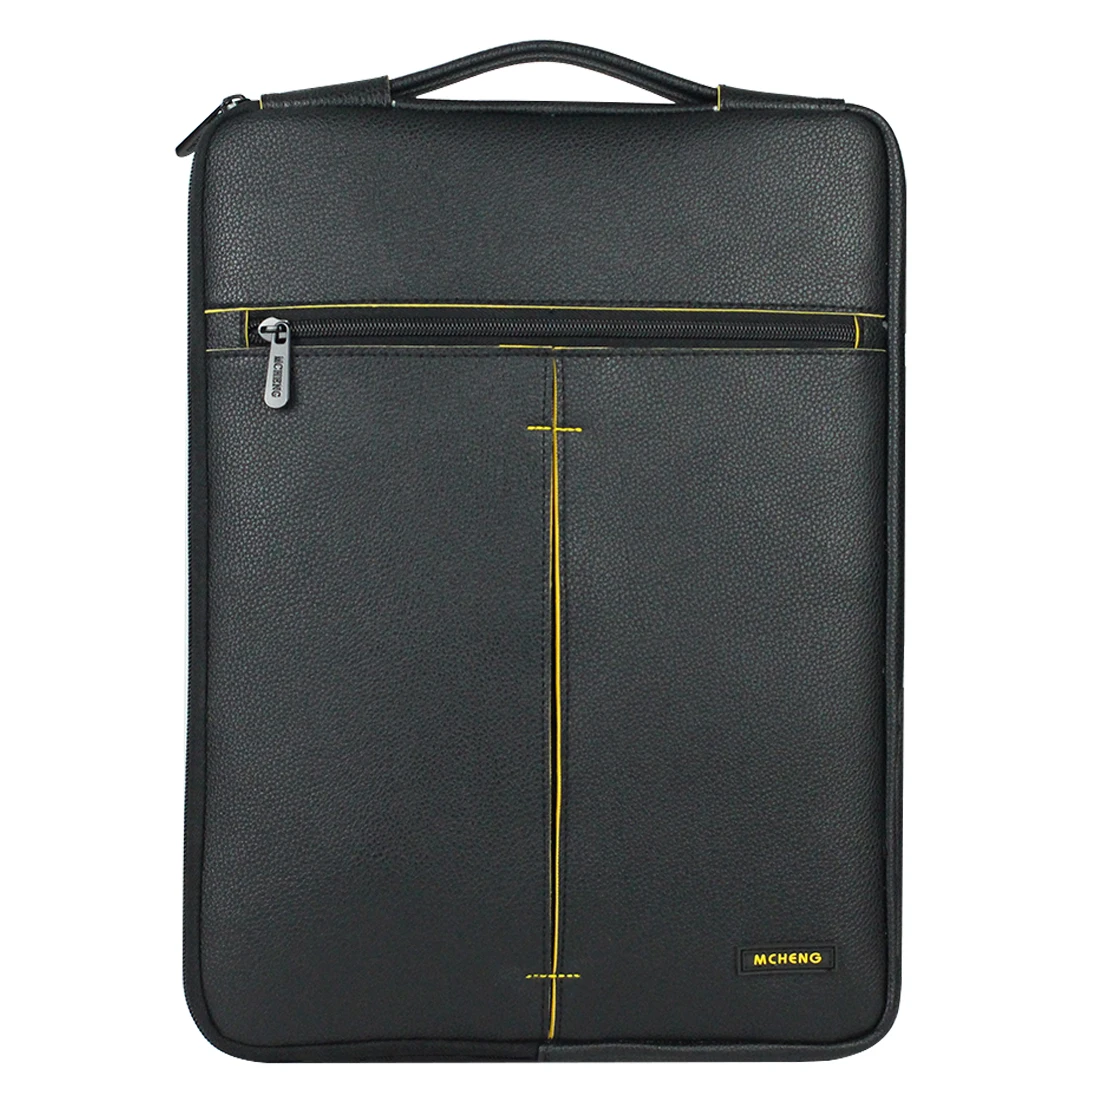 

MCHENG 10",13",14",15.6" inch Laptop Sleeve Multi-Functional Case/Water-Resistant Notebook Tablet Briefcase Carrying Bag